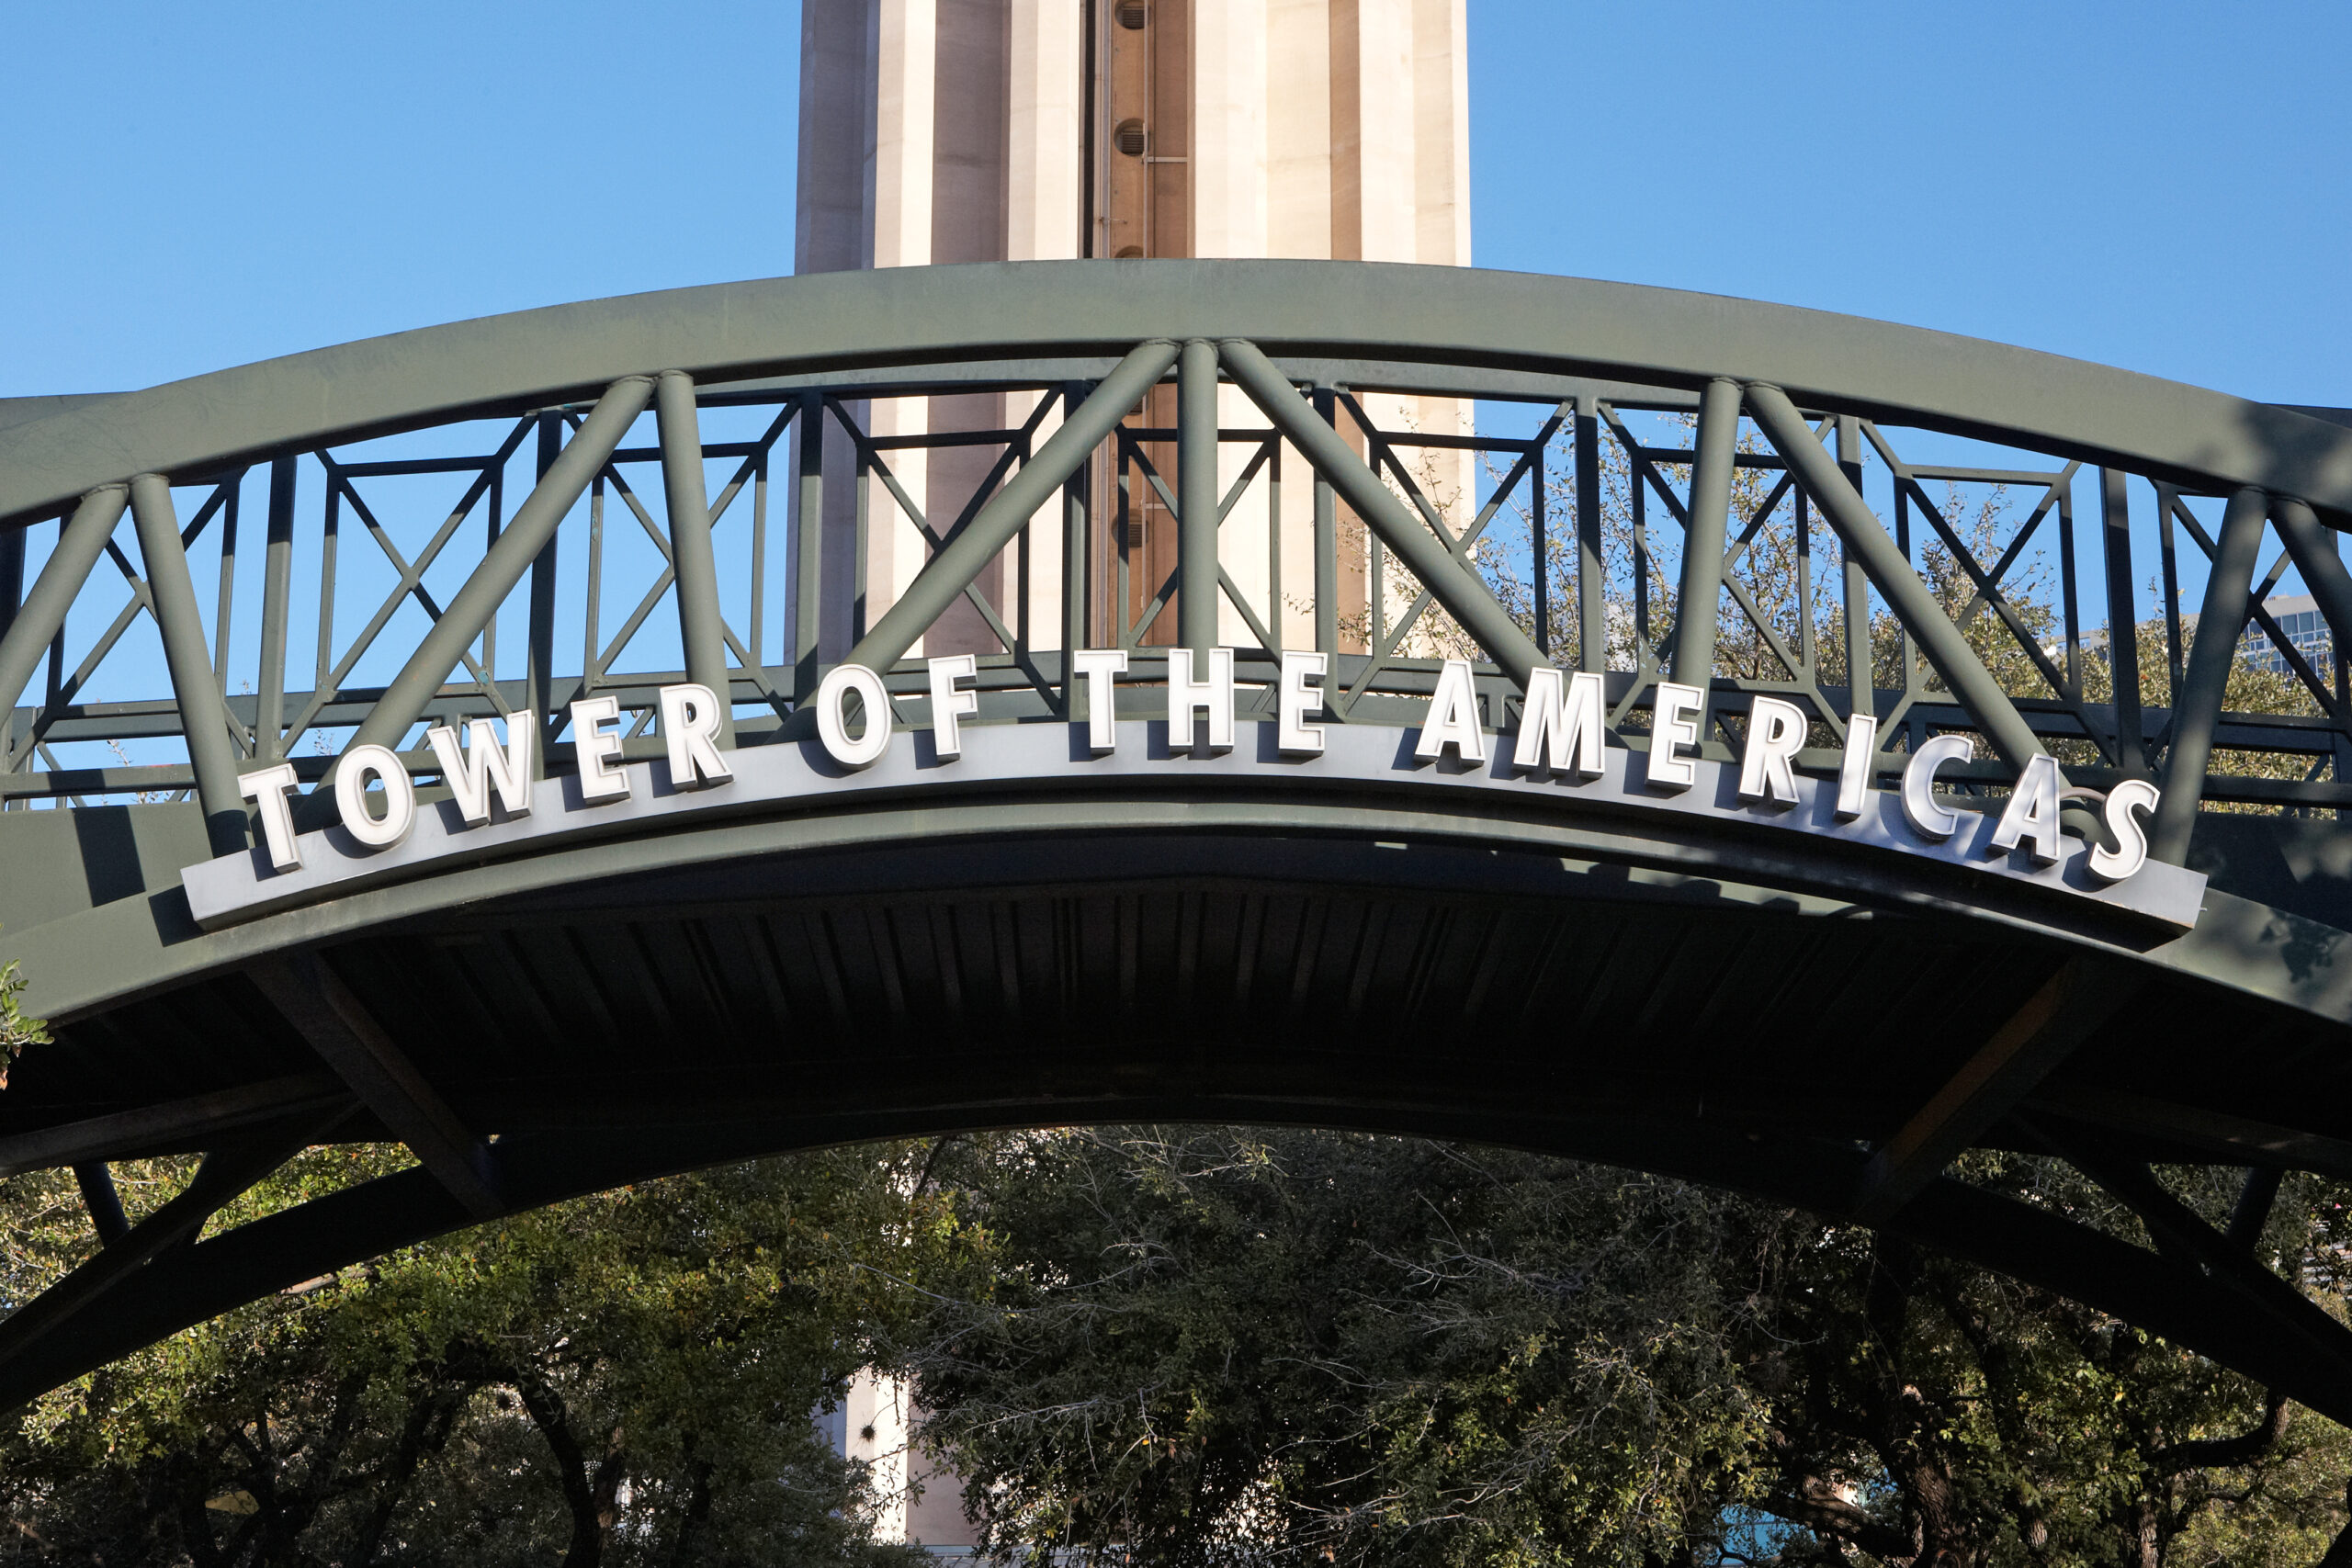 Entrance into Tower of the Americas in Downtown San Antonio